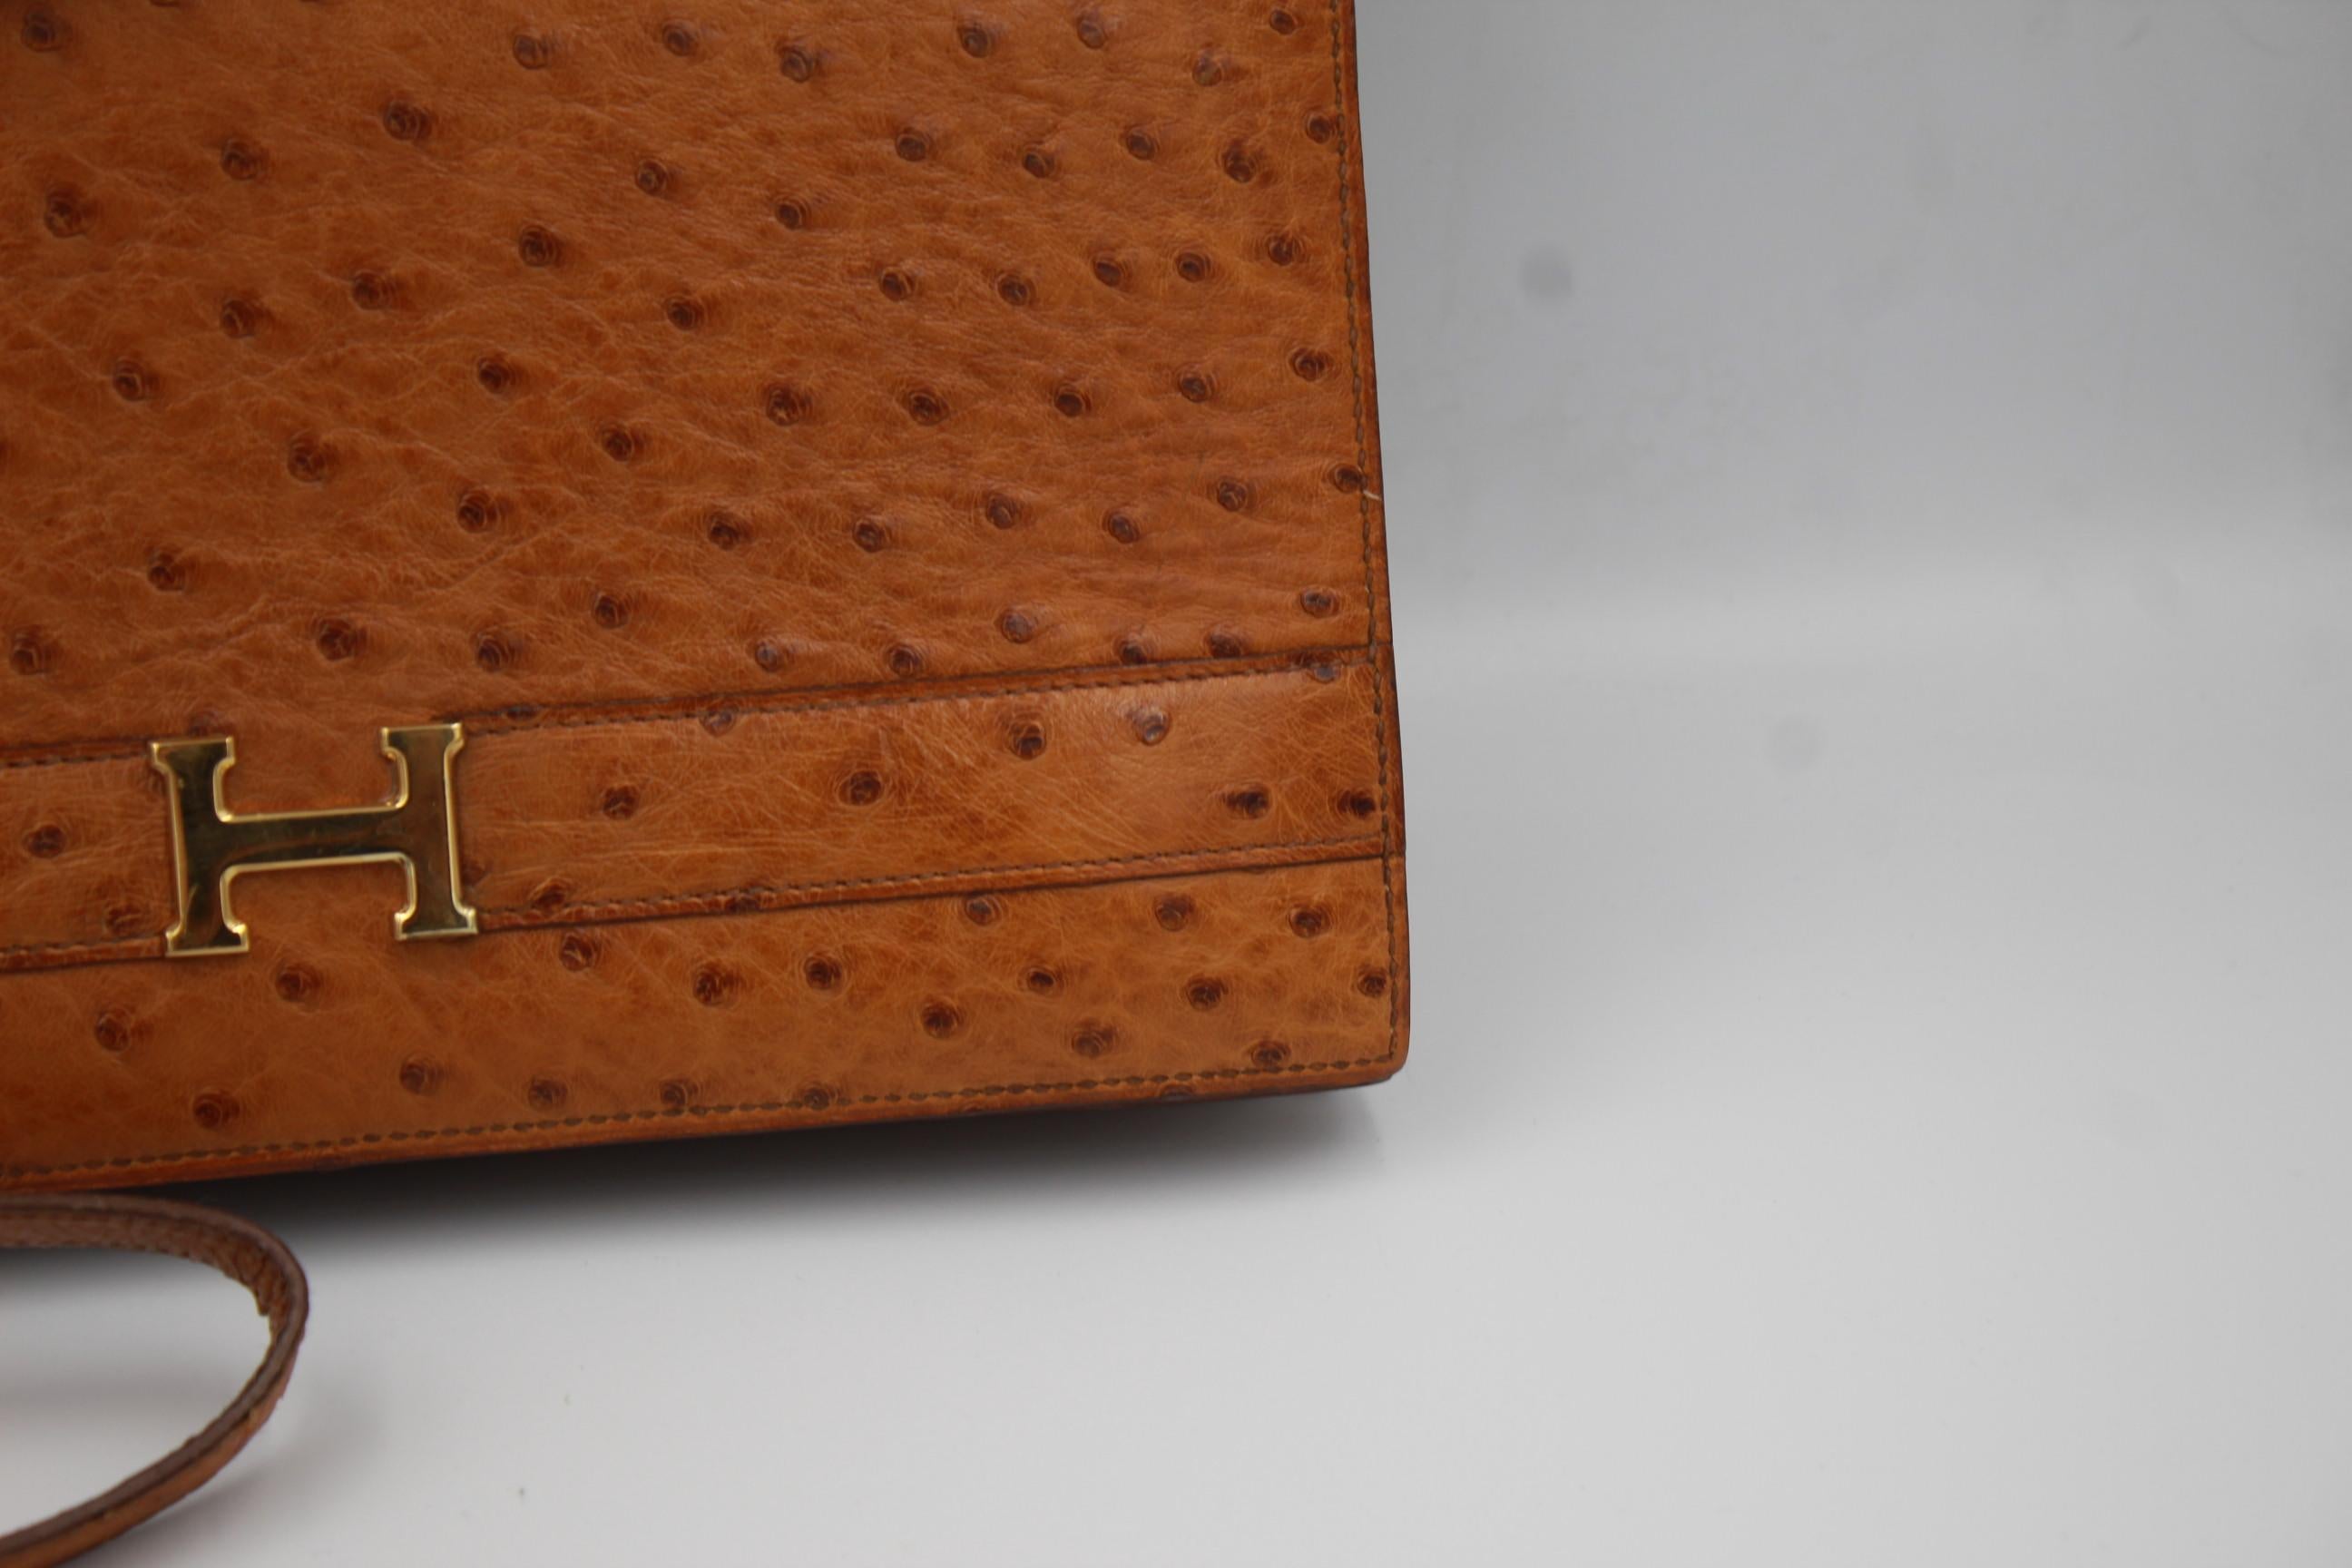 Rare Hermes vintage 'Annie' clutch bag in ostrich leather. Good vintage condition, some signs of wear in the clasp. Can be worn as a bag or as a clutch